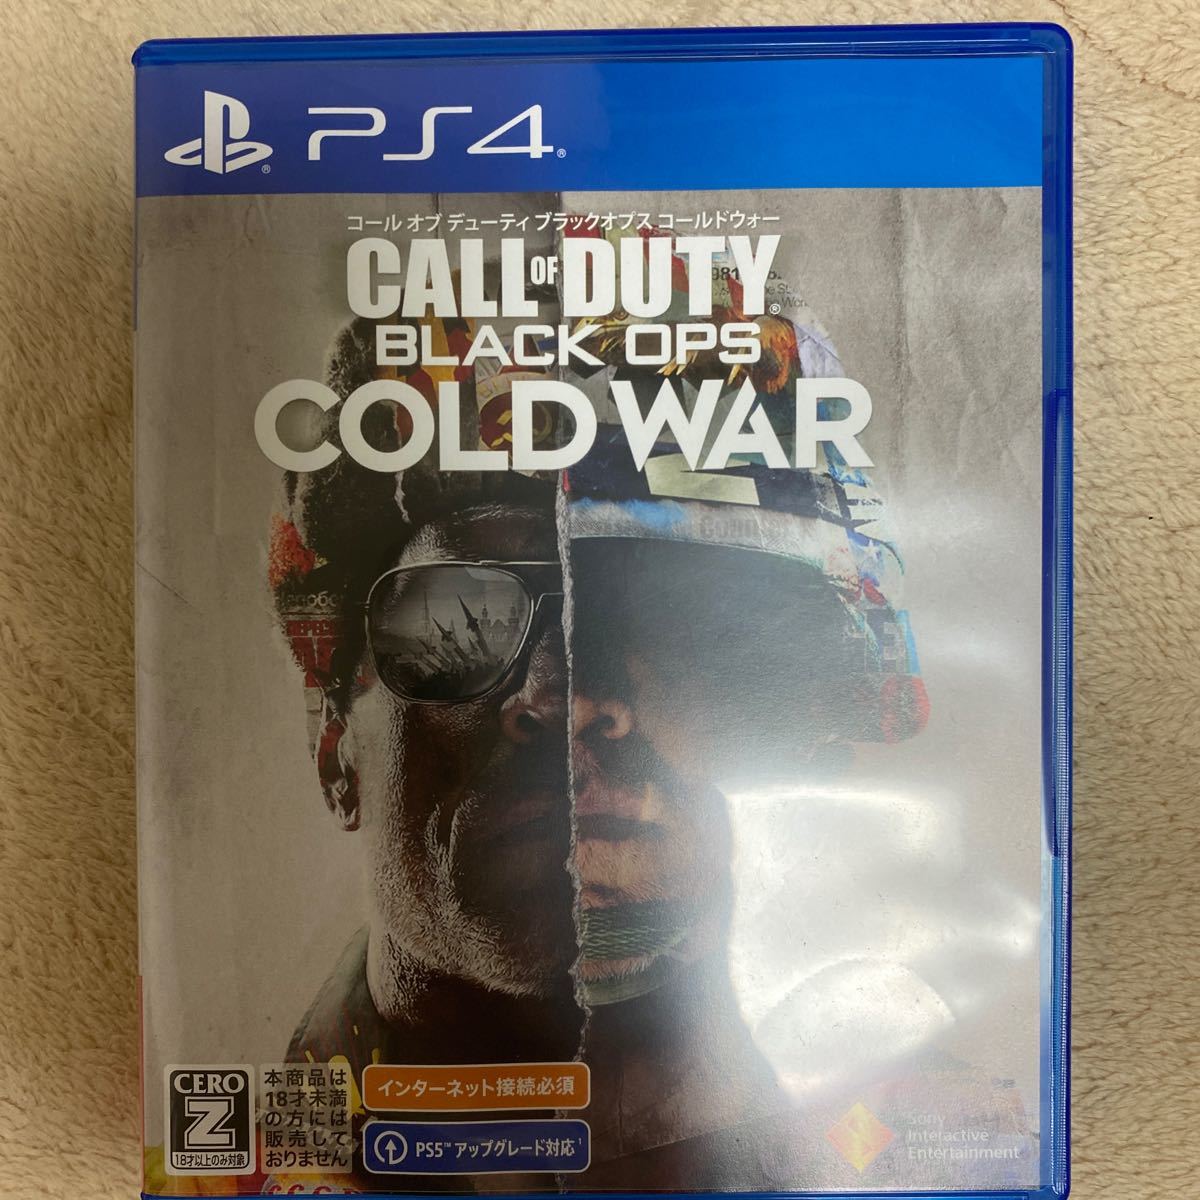 PS4 COLL OF DUTY BLACK OPS COLD WAR